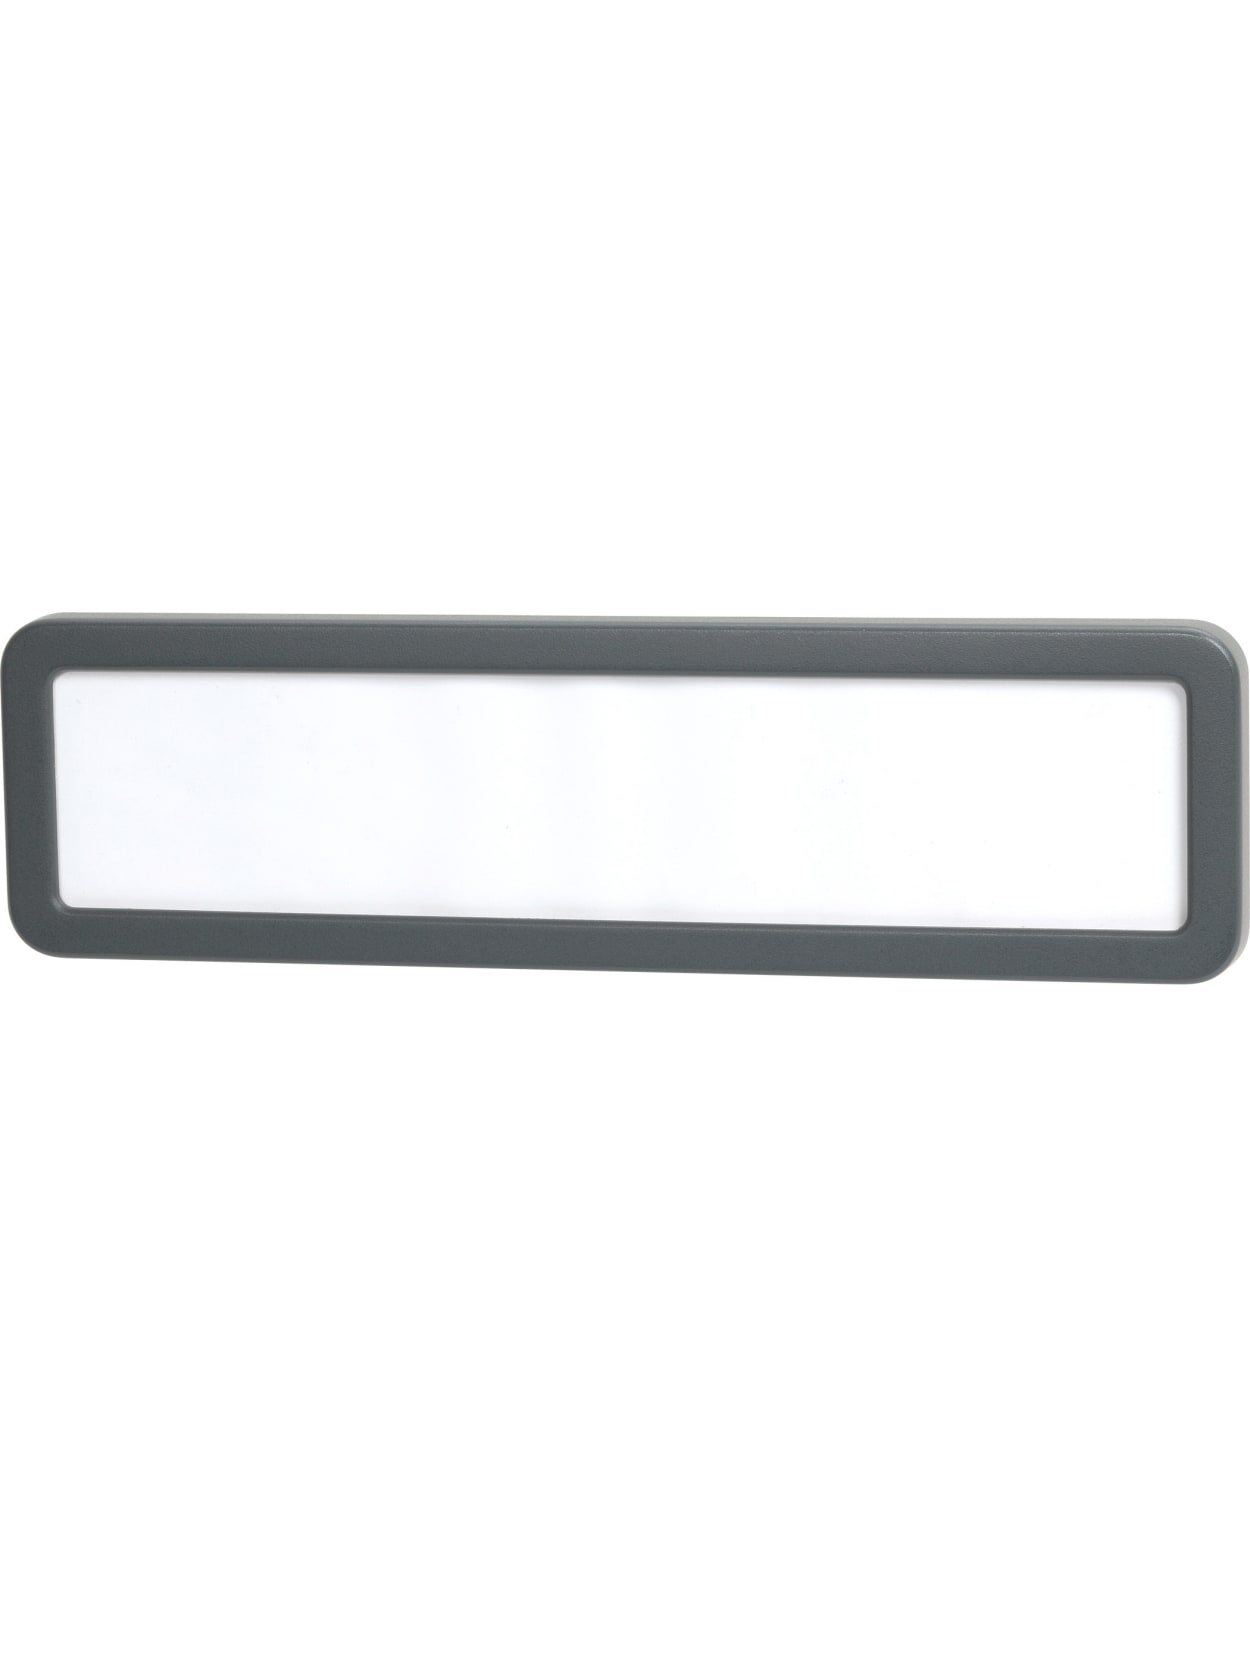 Office Depot Brand Cubicle Name Plate 2 58 X 9 18 X 78 30percent Recycled Charcoal Office Depot